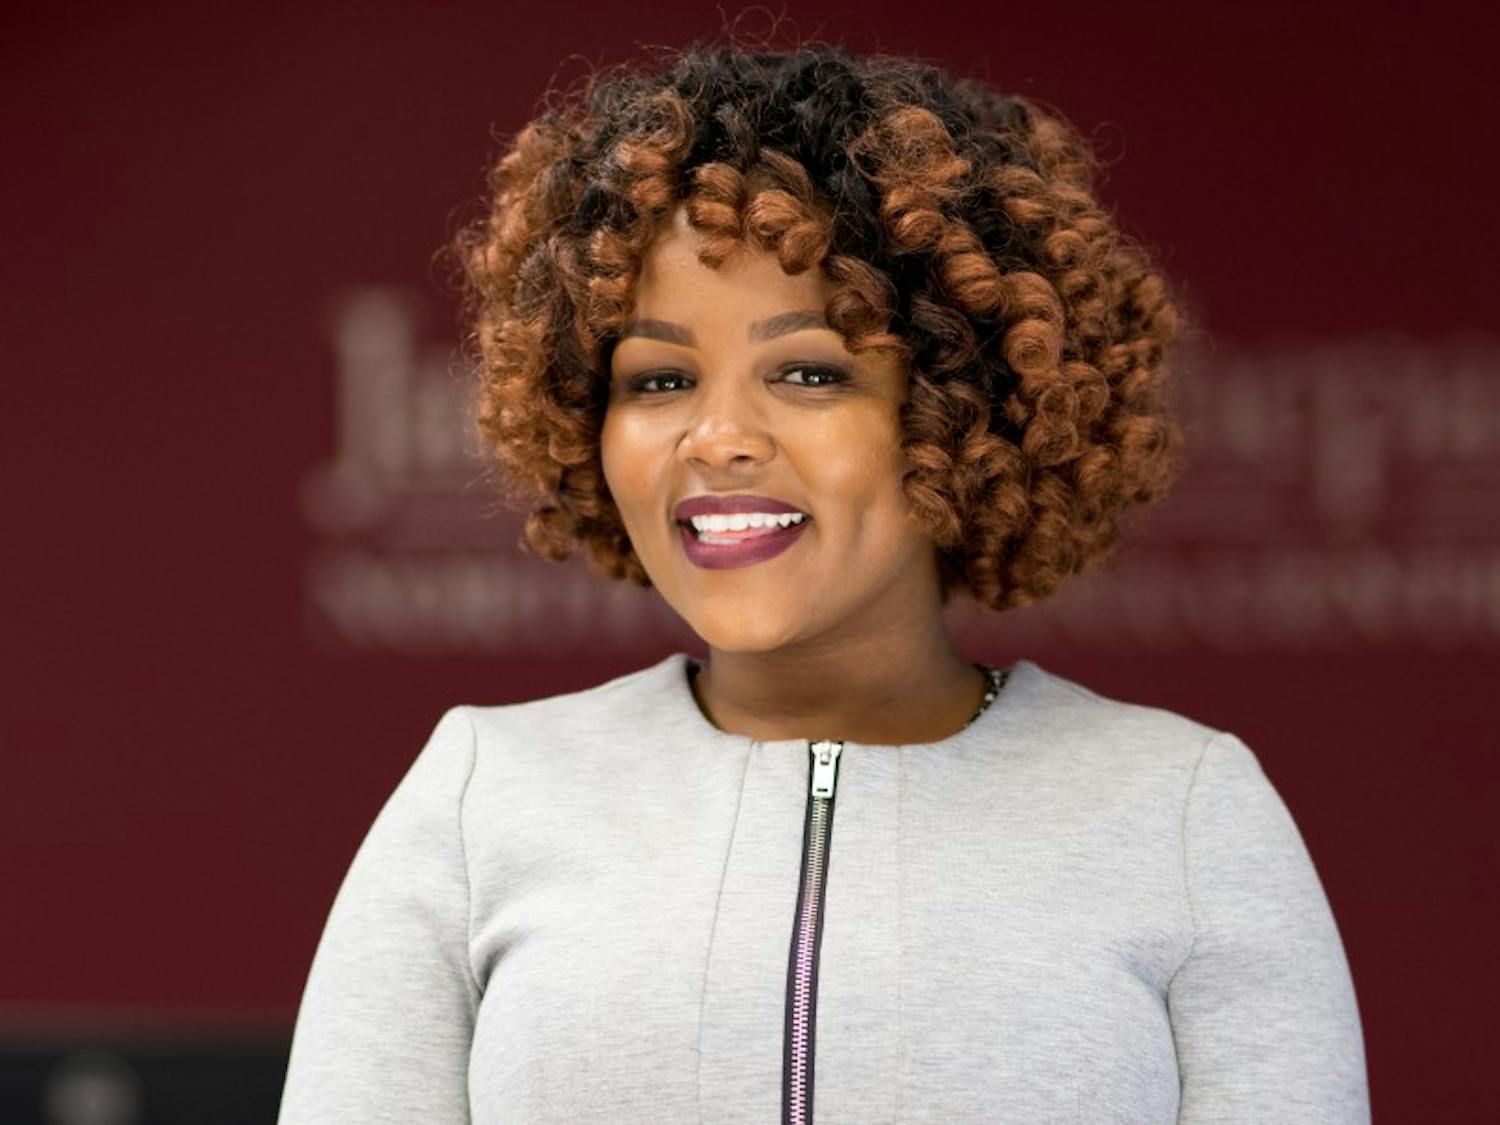 N.C. Central University student Bettylenah Njaramba was elected president of the UNC Association of Student Governments. She will have a non-voting seat on the UNC Board of Governors. Photo courtesy of NCCU.